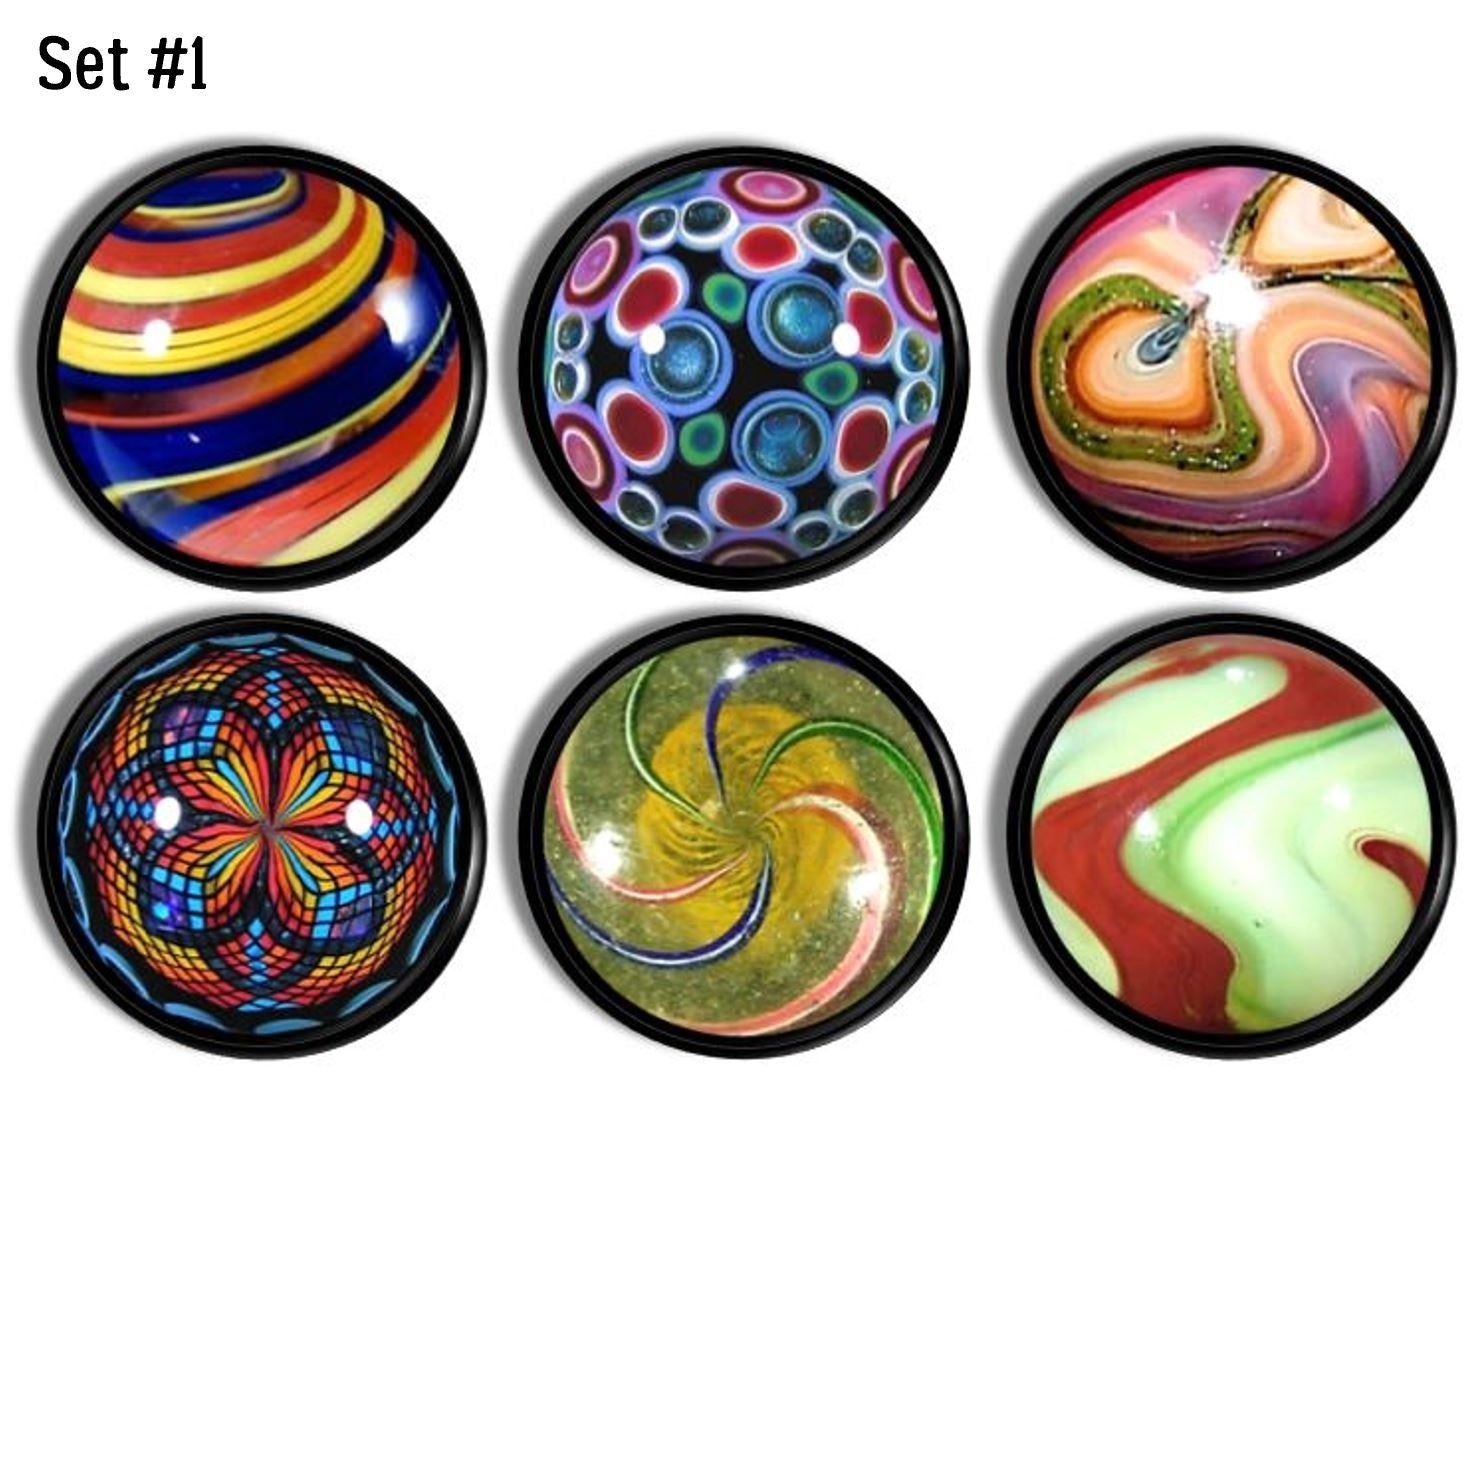 6 Knobs made in simulated antique glass marble designs. Drawer pulls in beautiful geometric and swirl patterned designs for children&#39;s furniture.